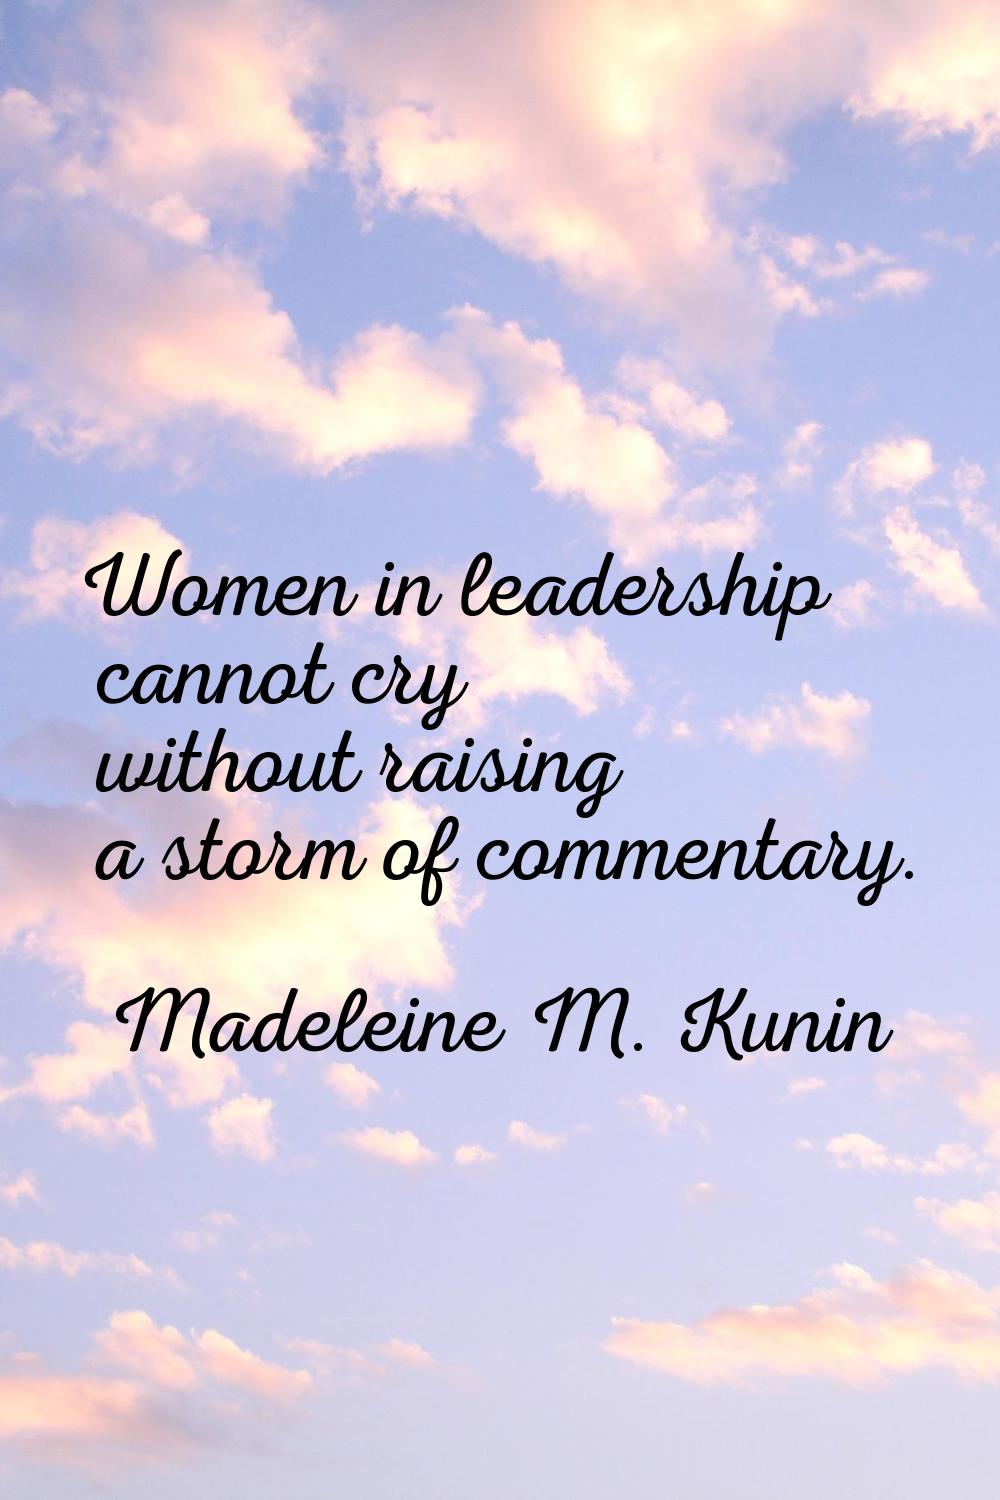 Women in leadership cannot cry without raising a storm of commentary.